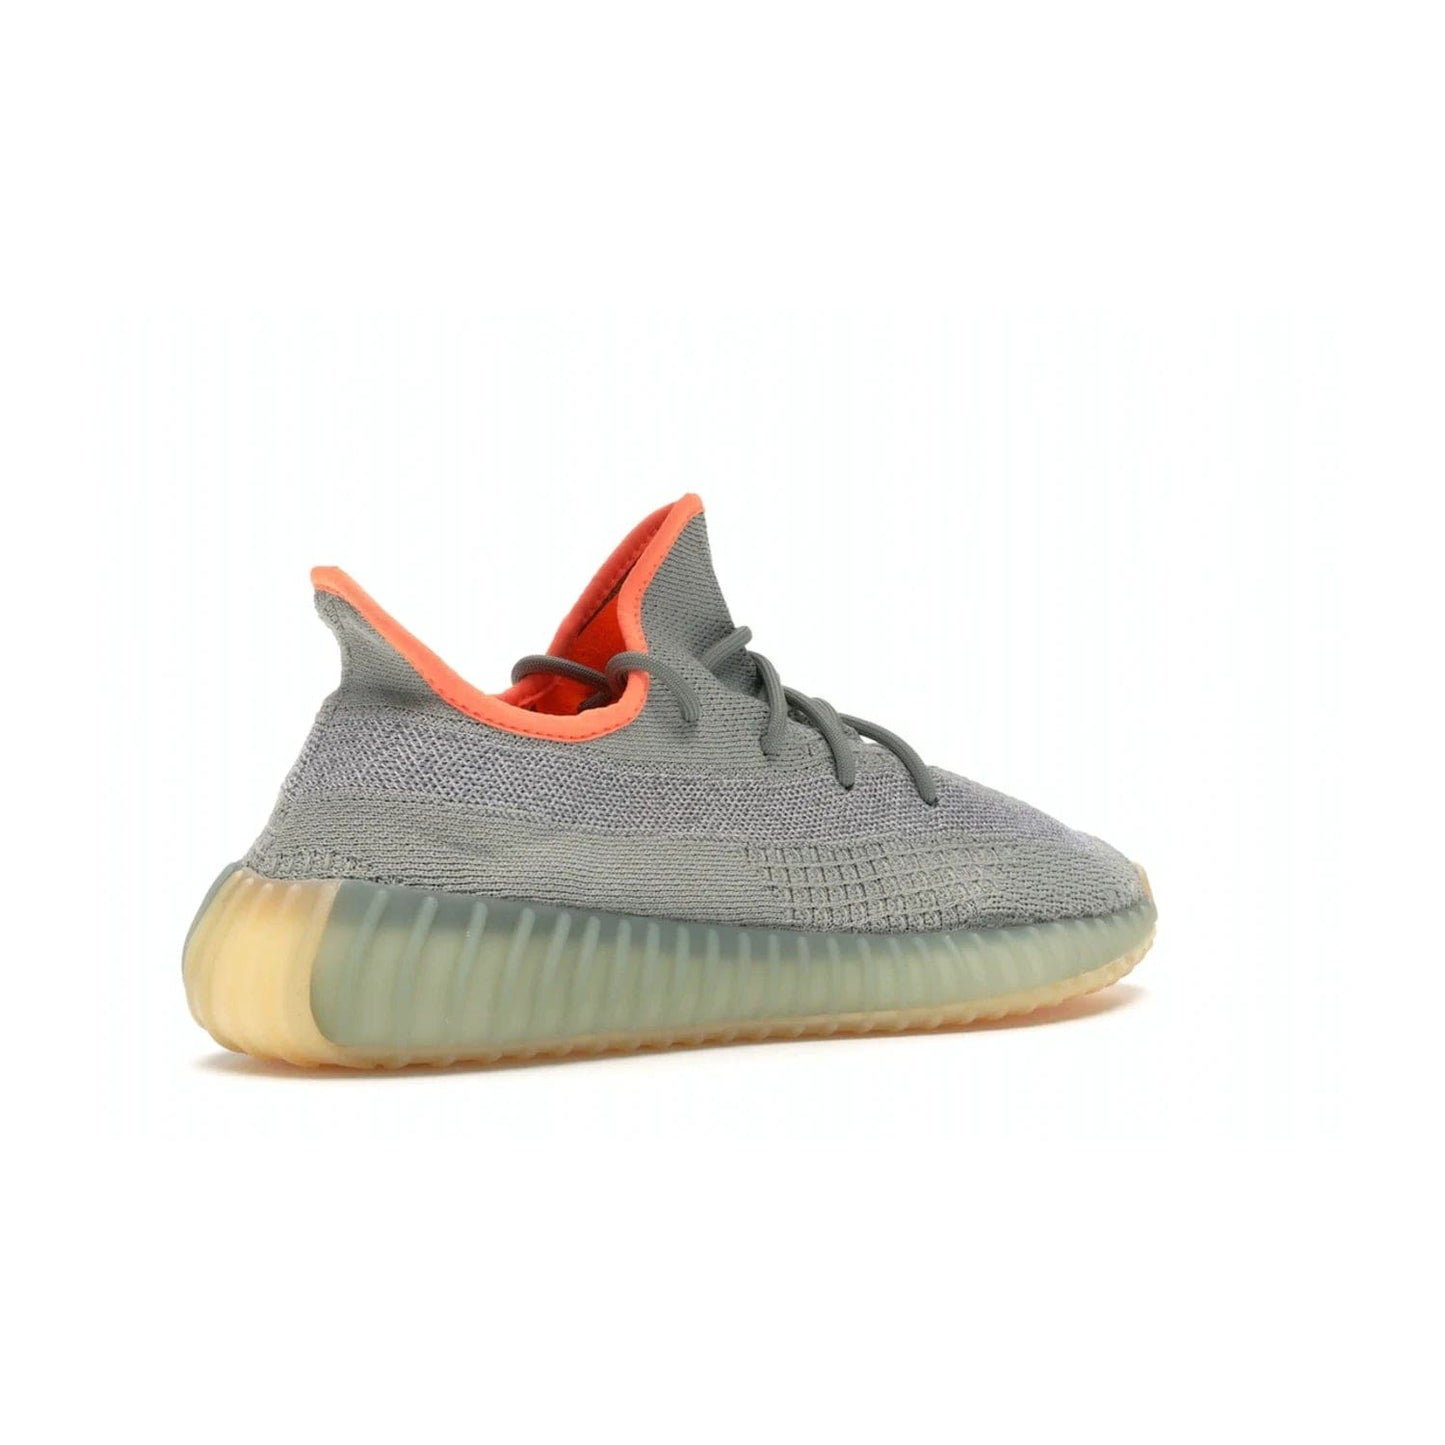 adidas Yeezy Boost 350 V2 Desert Sage - Image 33 - Only at www.BallersClubKickz.com - Upgrade your style with the adidas Yeezy Boost 350 V2 Desert Sage. This 350V2 features a Desert Sage primeknit upper with tonal side stripe, and an orange-highlighted translucent Boost cushioning sole. Stay on-trend in effortless style.